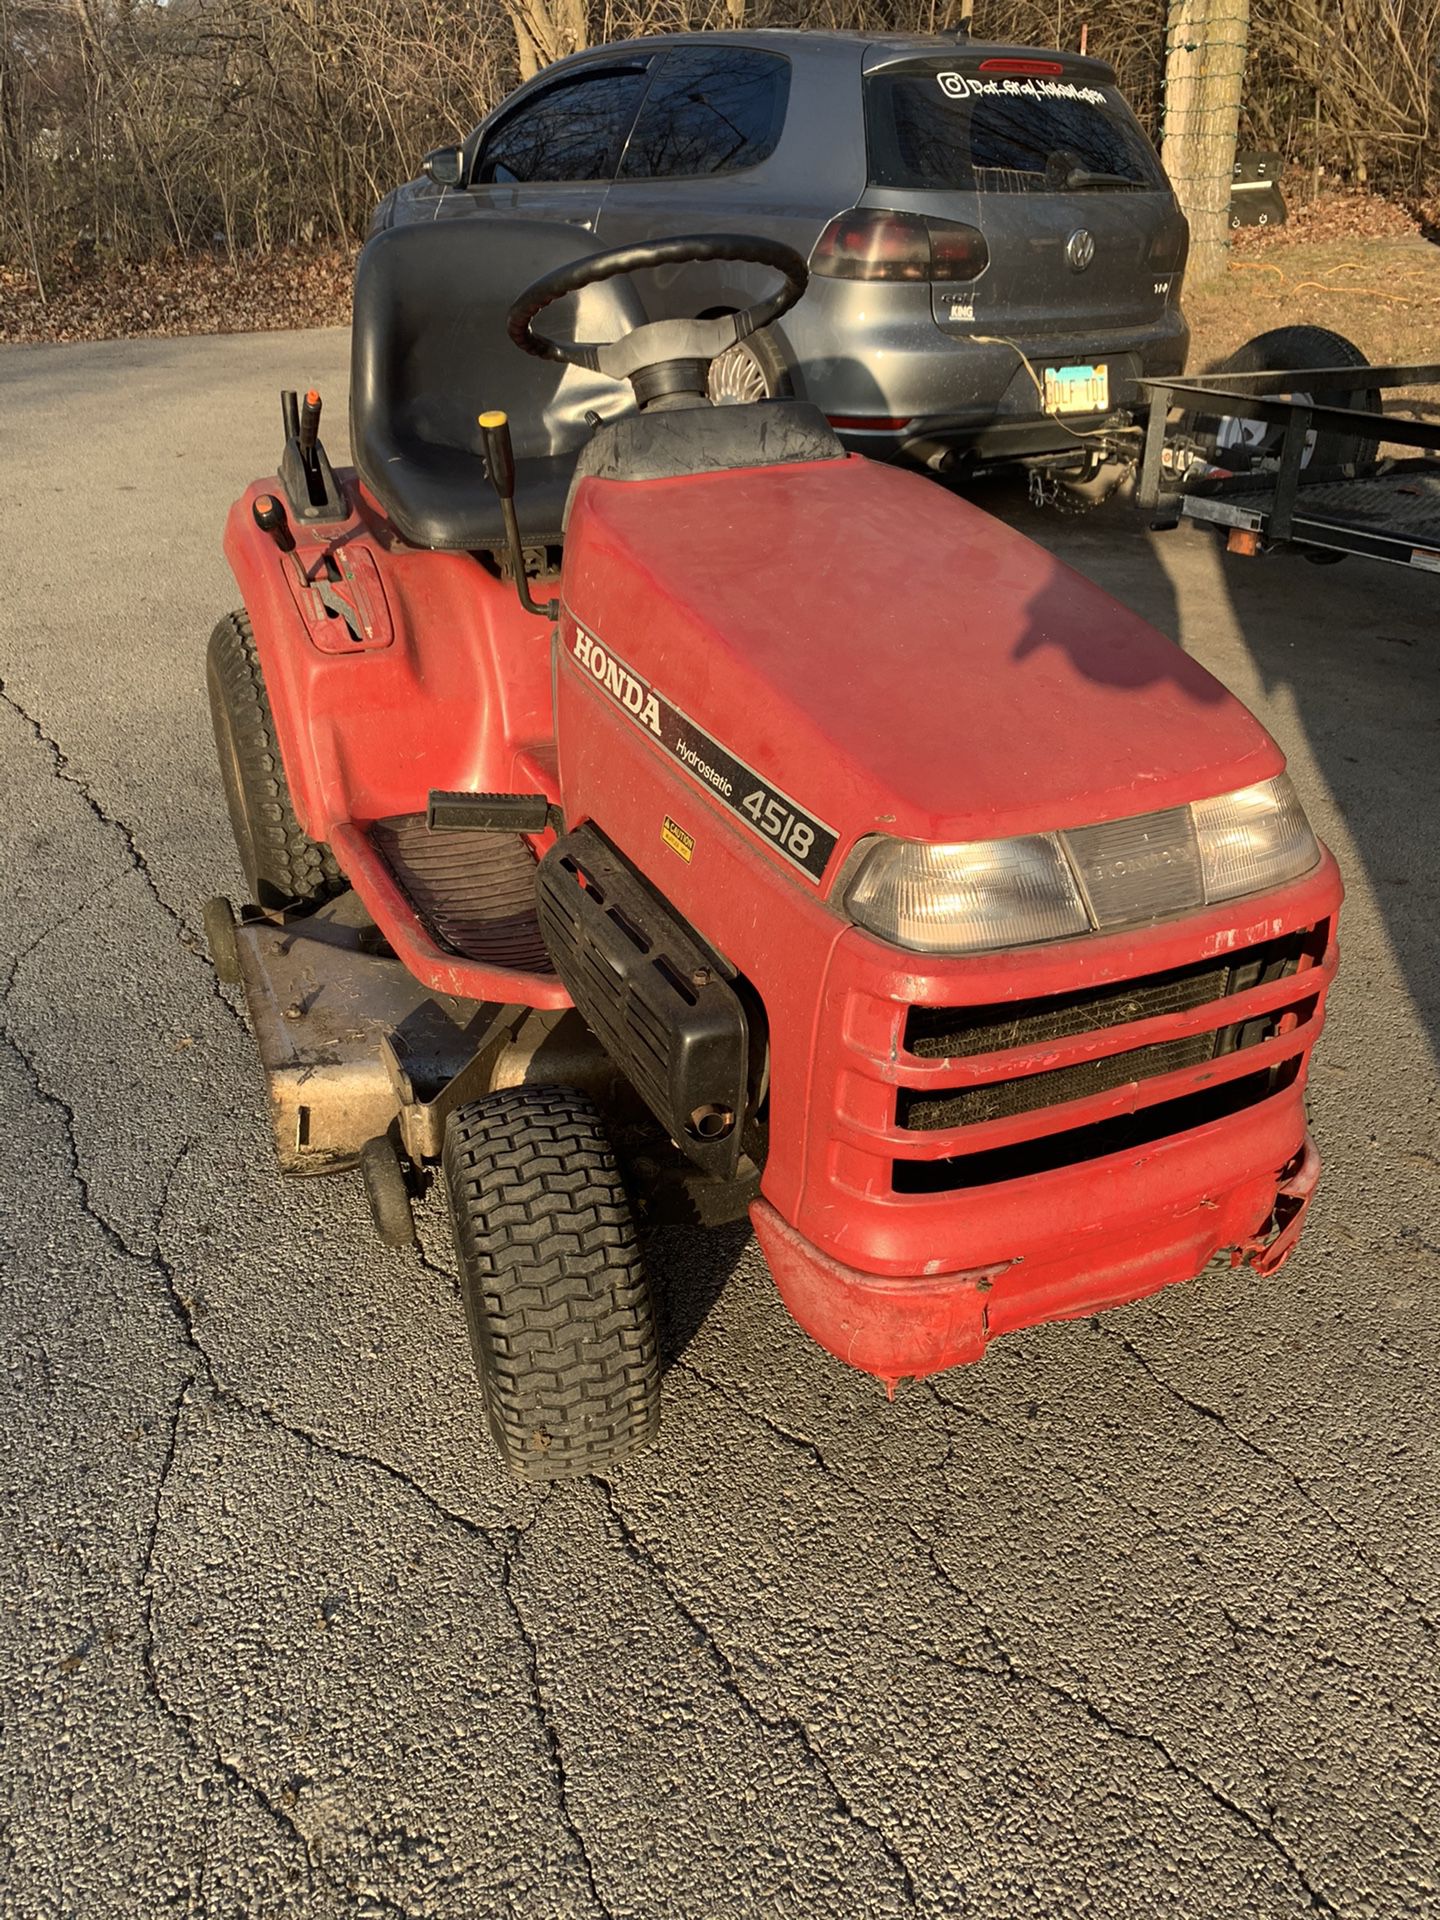 Honda 4518 hydrostatic riding mower tractor. Runs, cuts, drives. It’s a hydro, so just move the lever to go and stop, no gears, and you don’t even nee